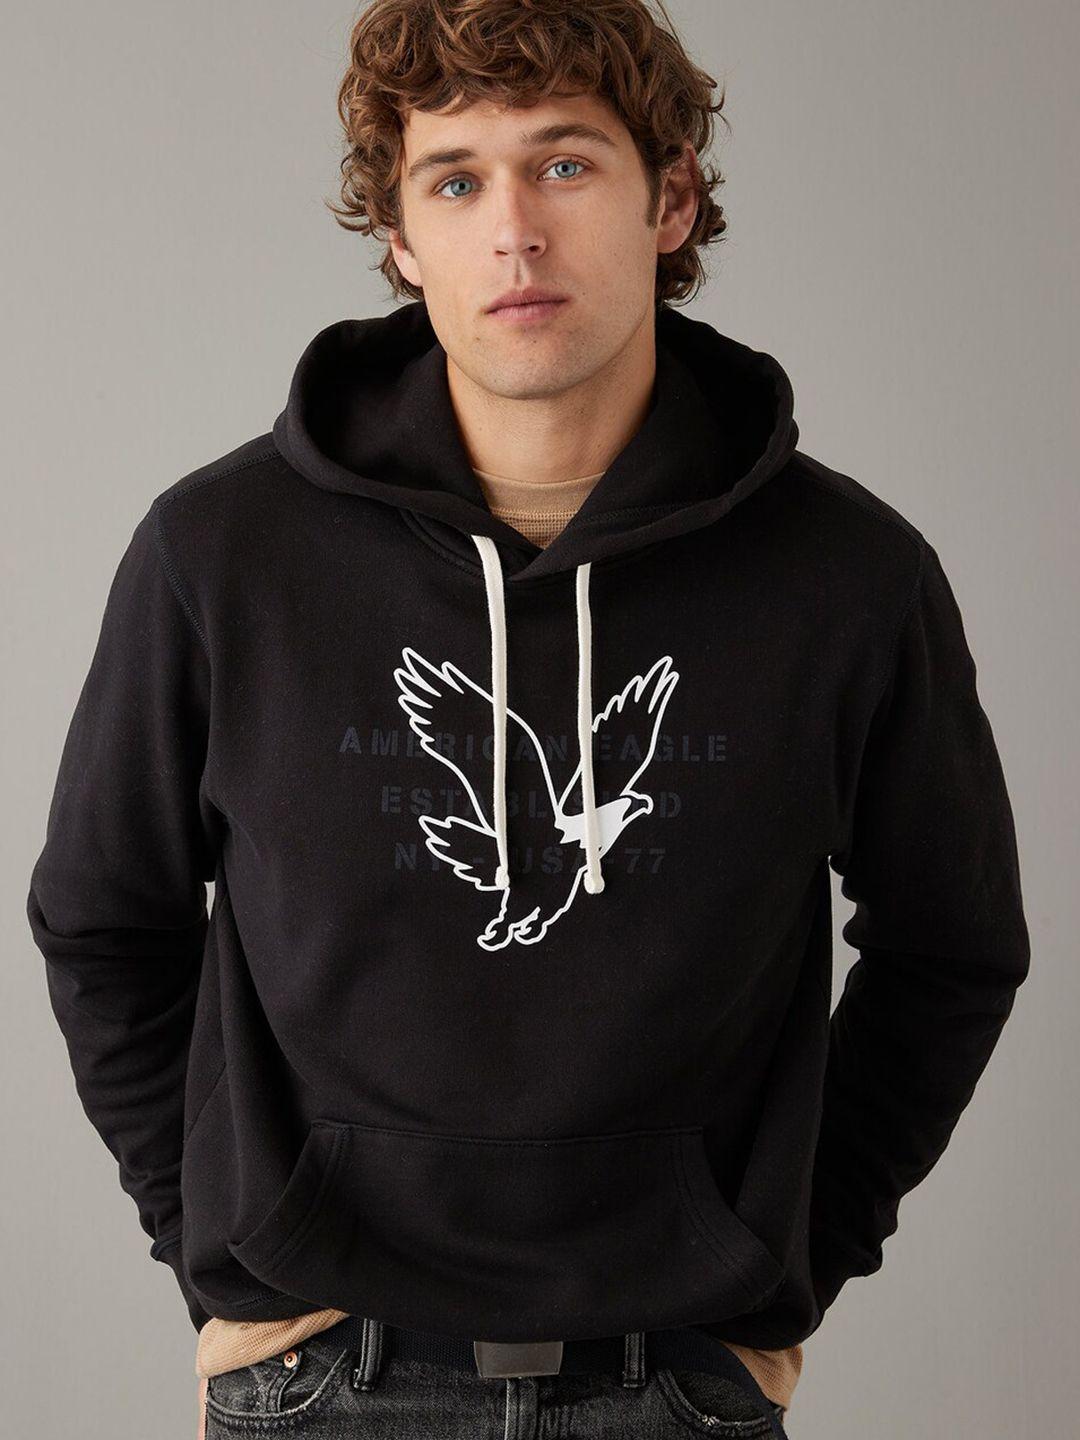 american-eagle-outfitters-graphic-printed-hooded-pullover-sweatshirt